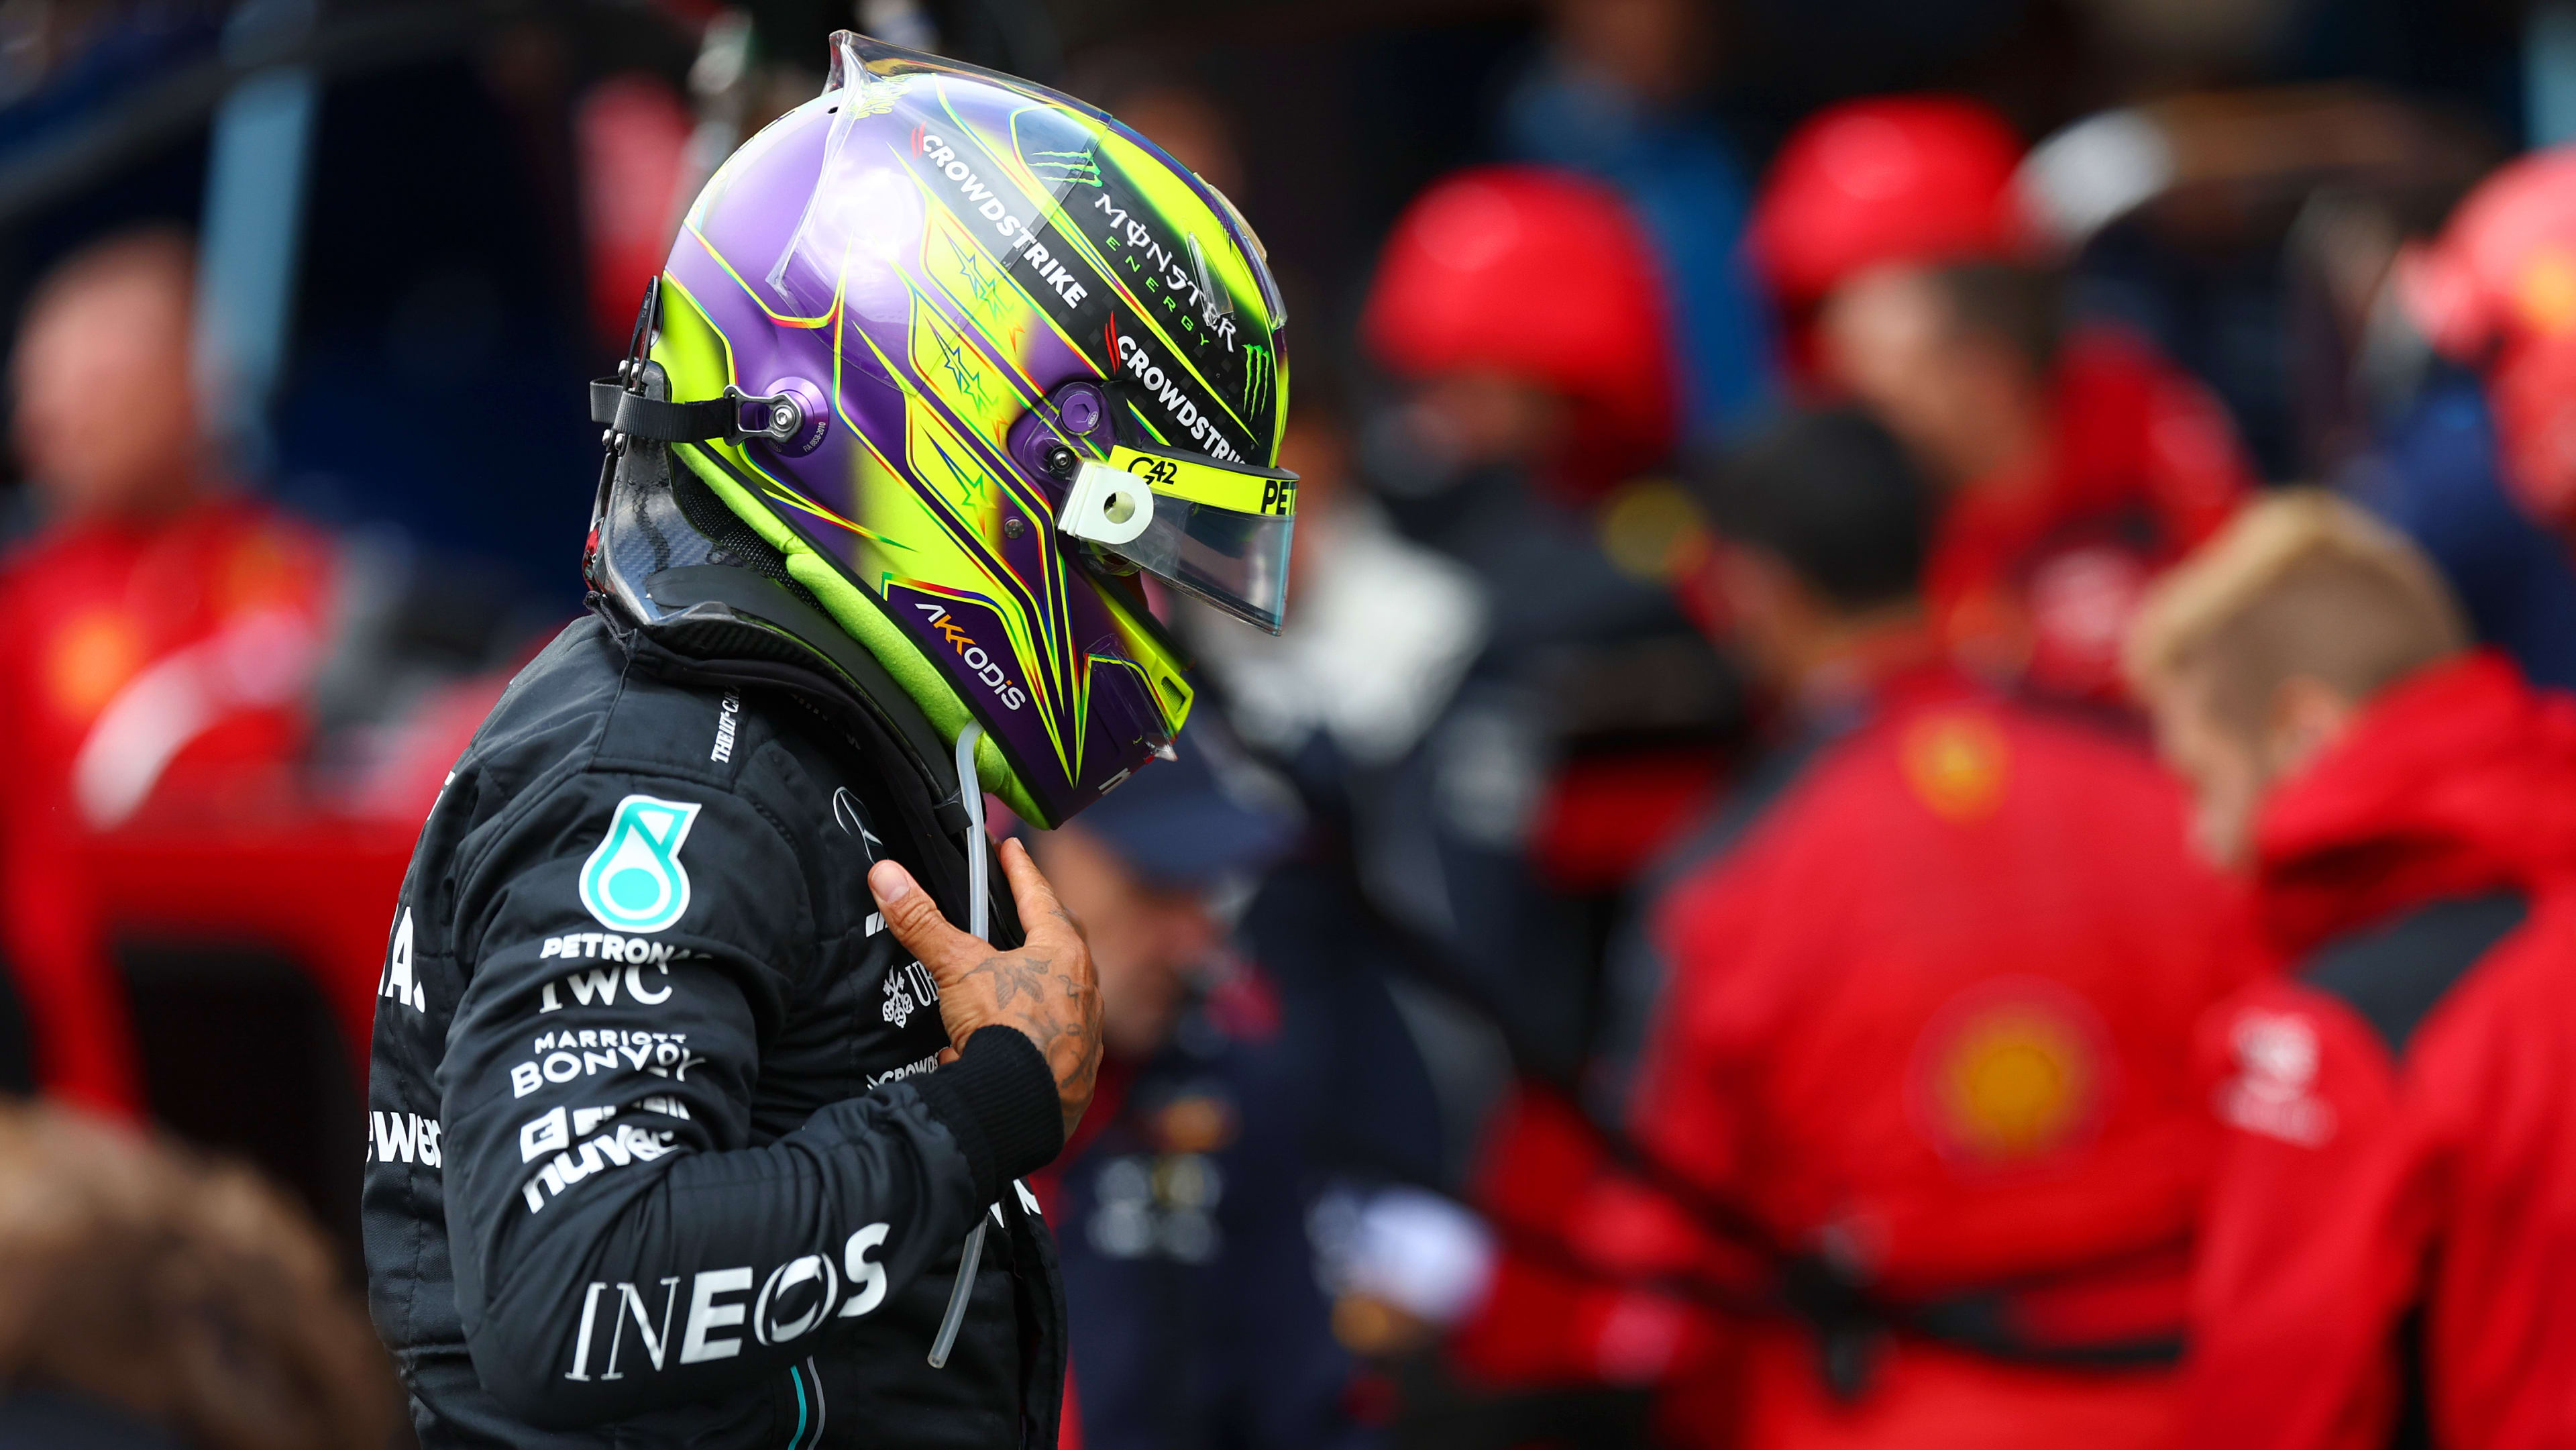 ZANDVOORT, NETHERLANDS - AUGUST 27: Lewis Hamilton of Great Britain and Mercedes prepares for the